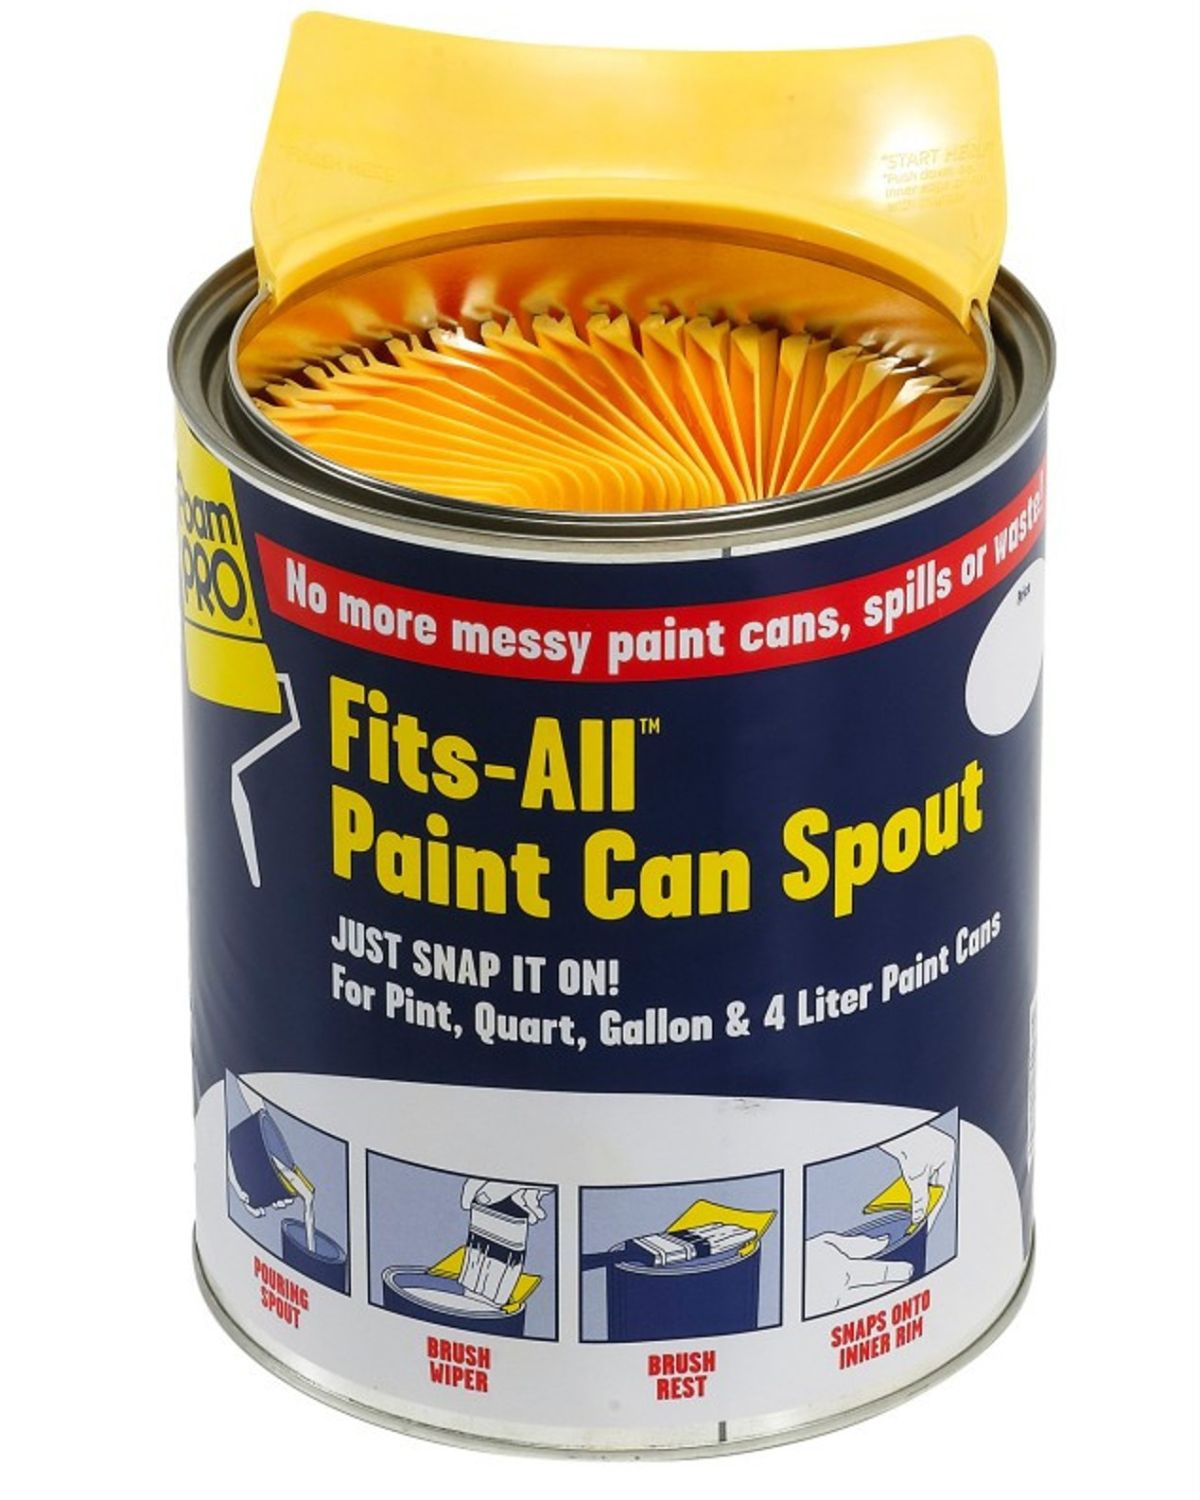 Fits-All™ Paint Can Spout - Sherwin-Williams